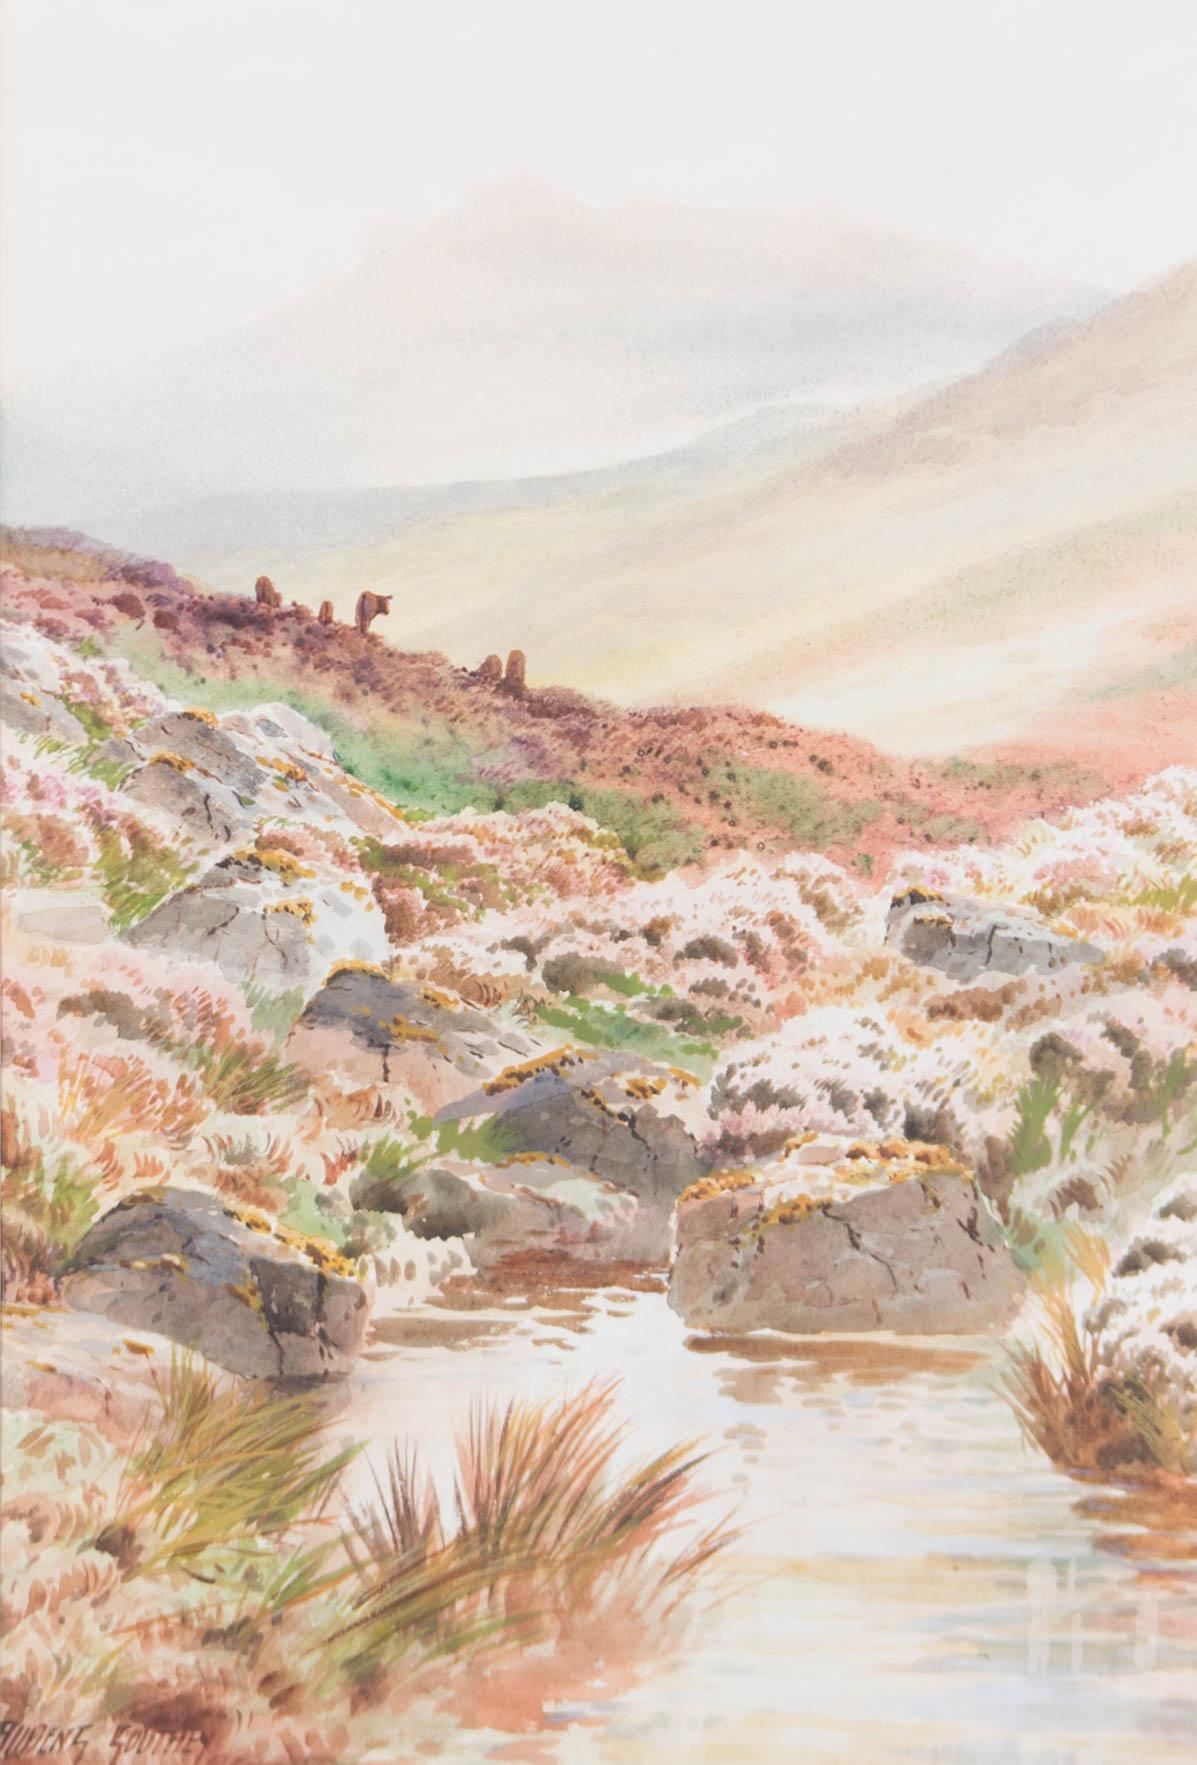 A beautiful watercolour showing cattle grazing on the slopes of the highlands in the middle ground and a pool of water surrounded by rocks and heather, reflecting the sunset in the foreground. The artist has signed to the lower left corner.

The